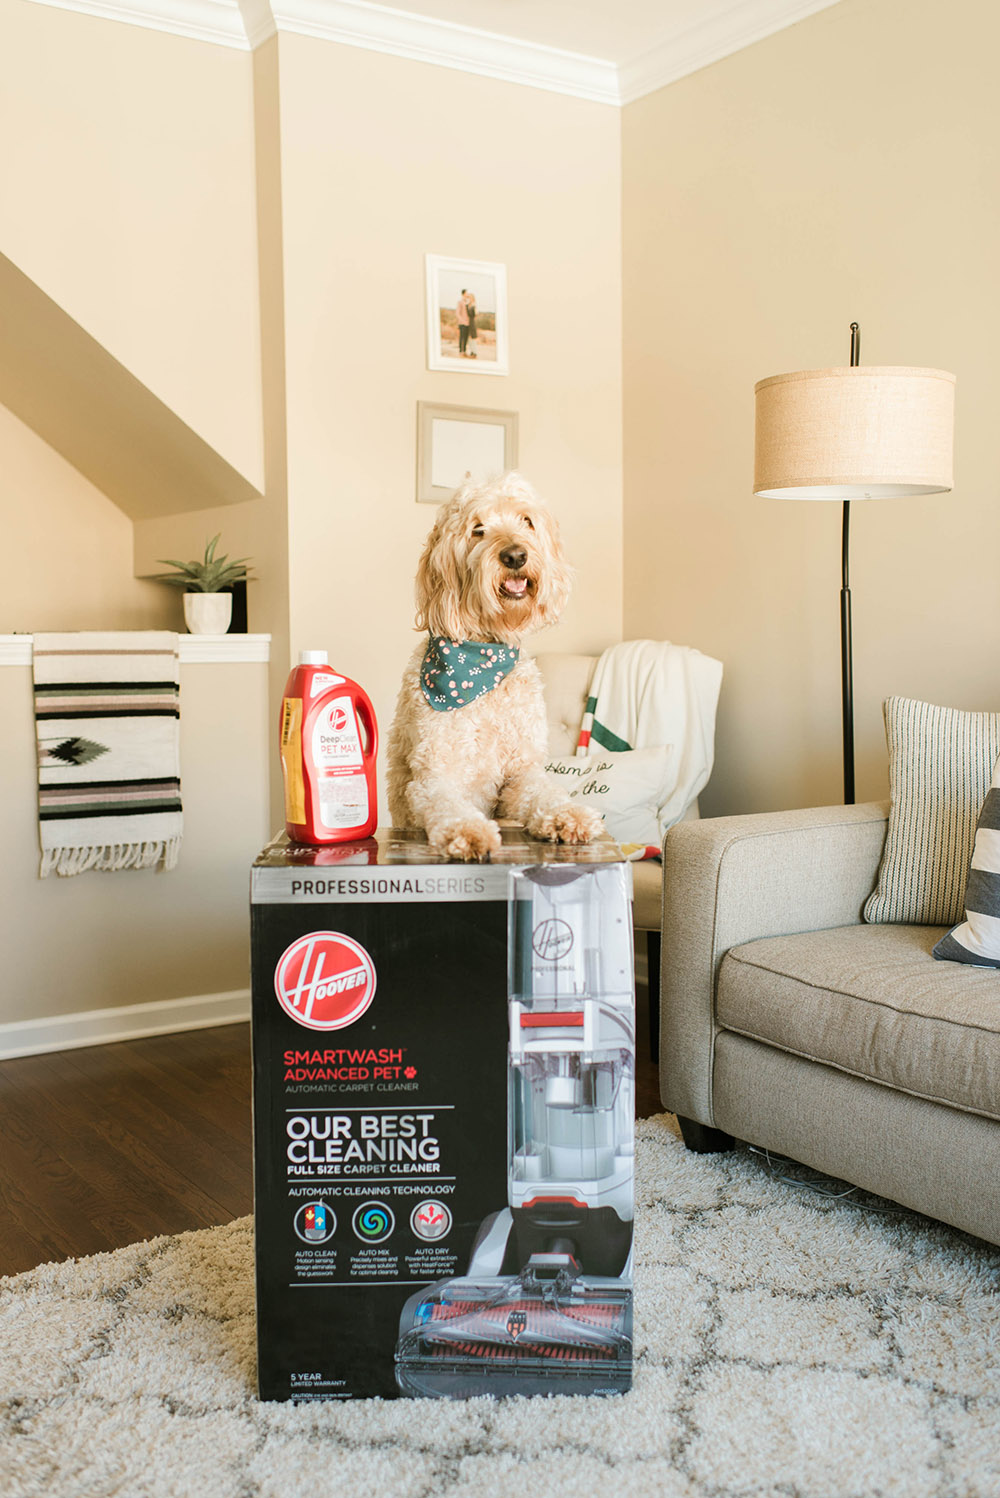 A dog with a bandana stands behind a Hoover SmartWash advanced pet carpet cleaner and box.